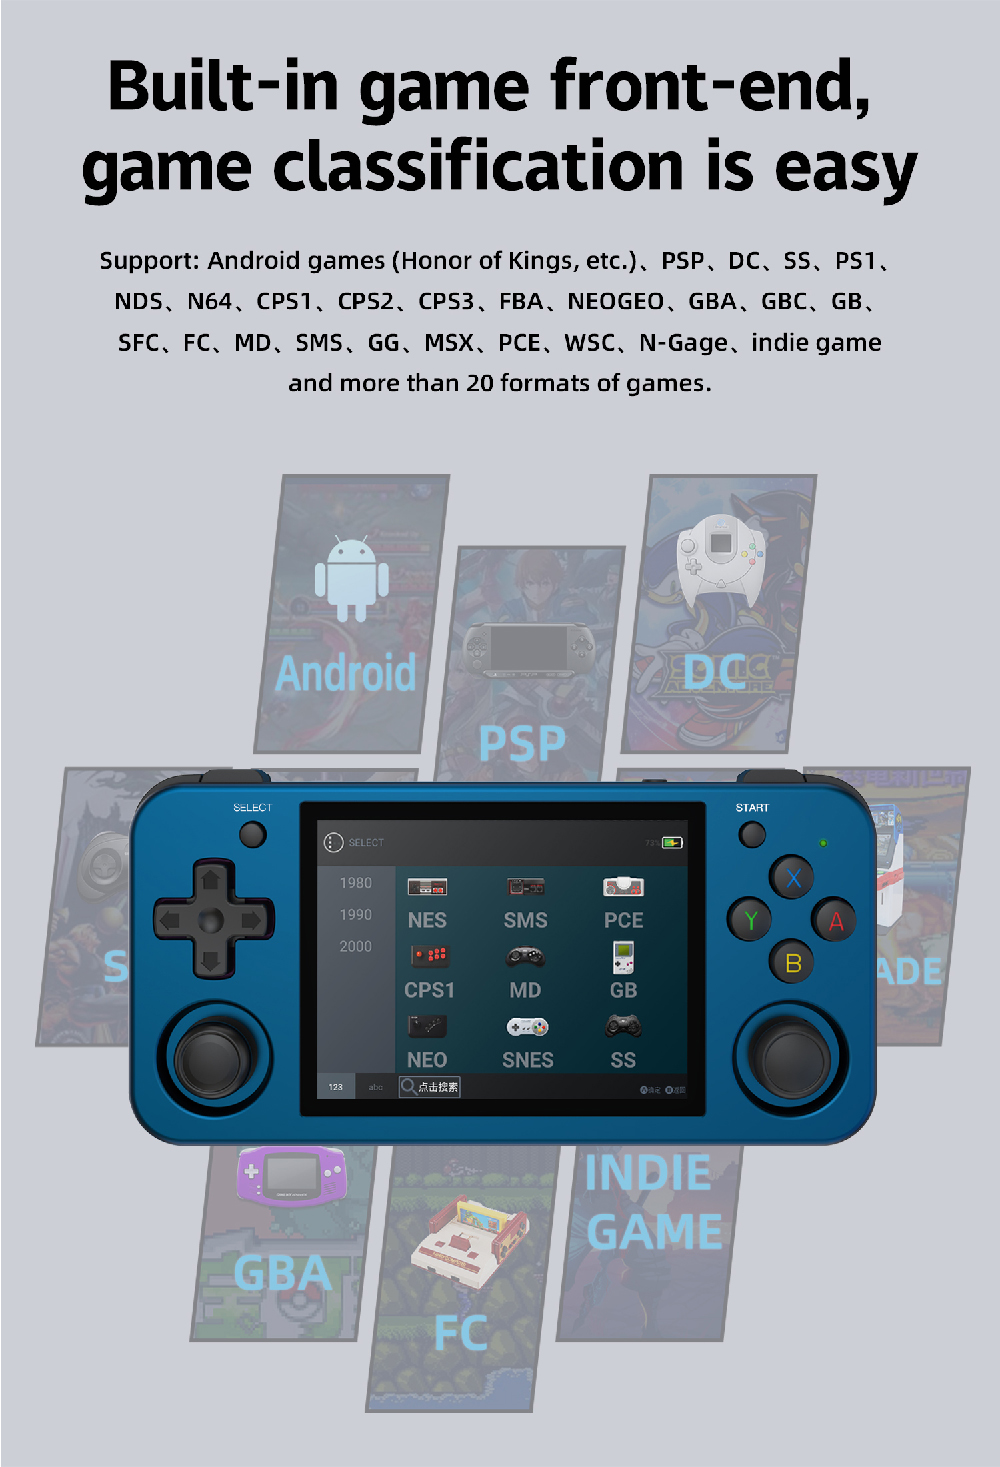 RG353M Handheld Retro Gaming Console by ANBERNIC